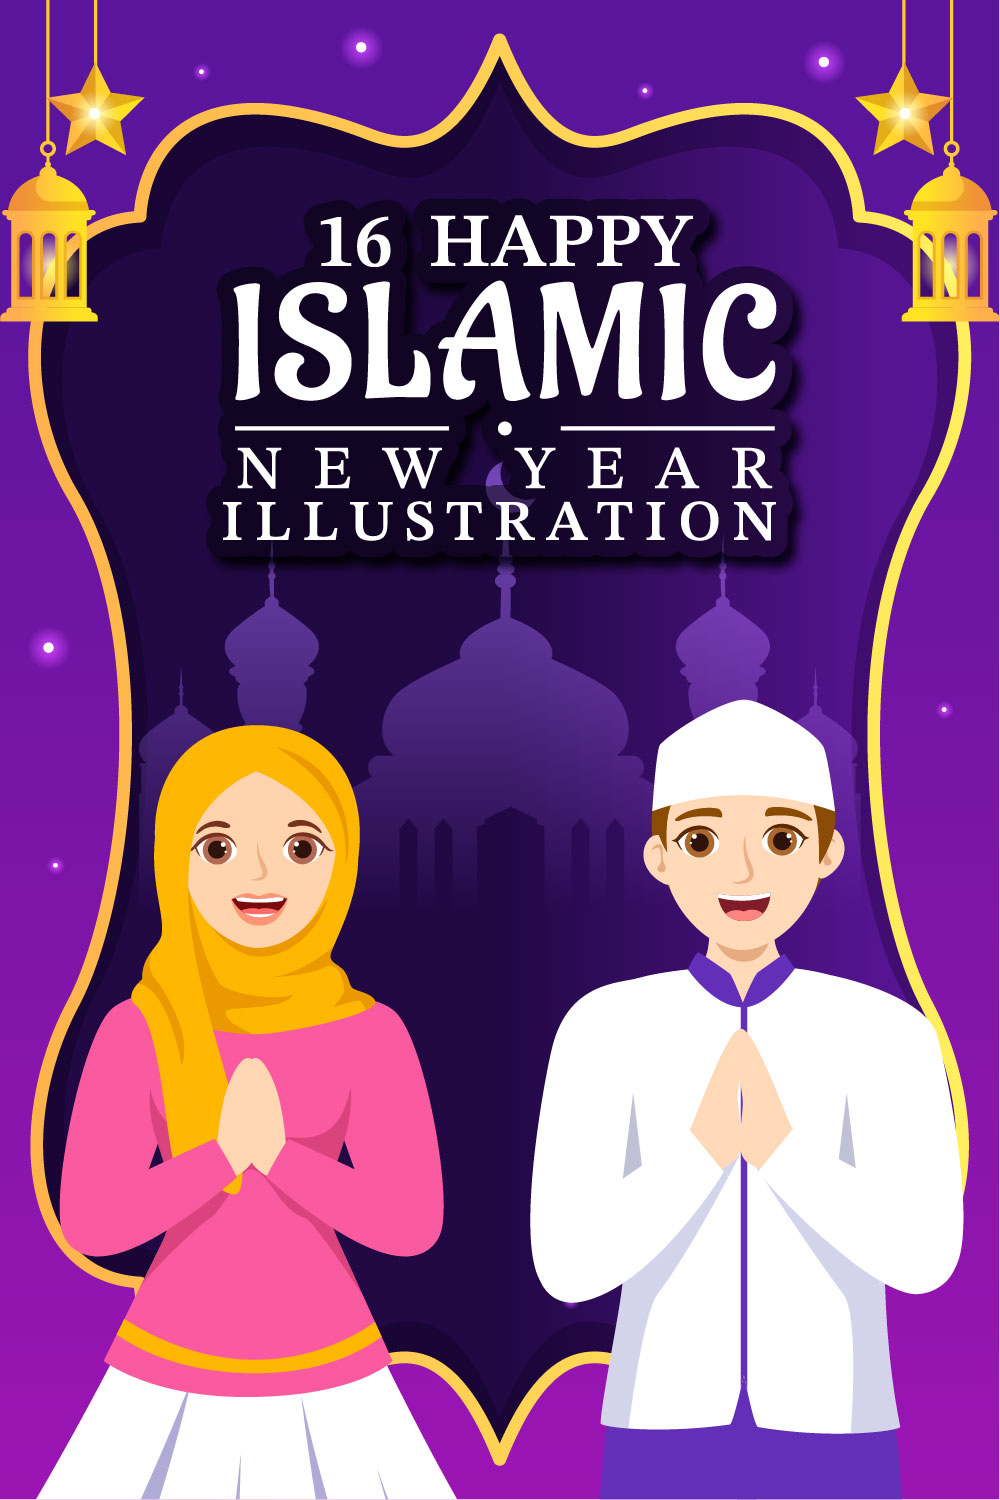 16 Happy Islamic New Year Illustration pinterest preview image.